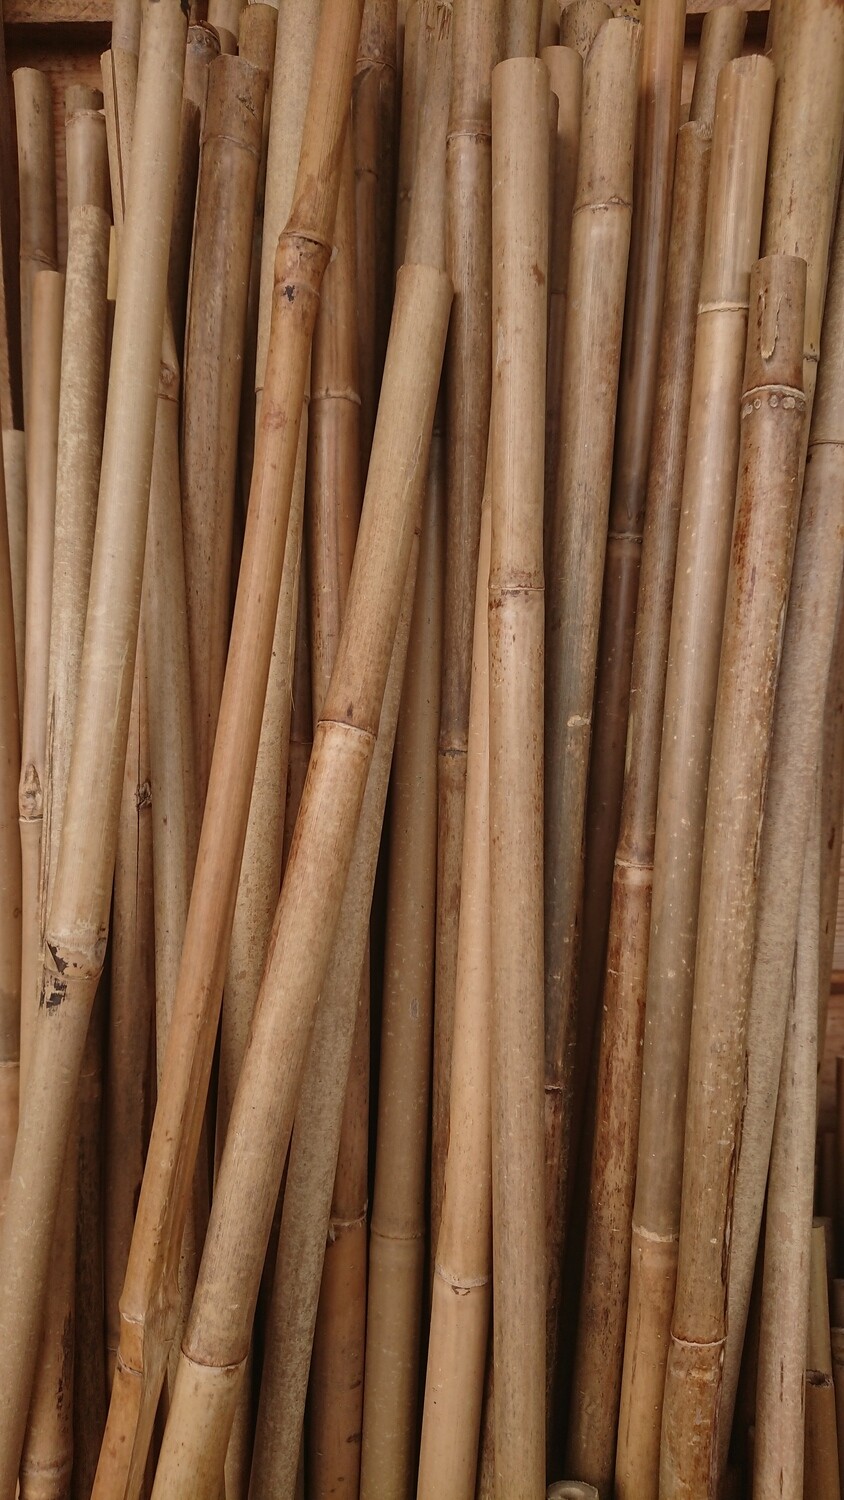 Bamboo canes 7ft